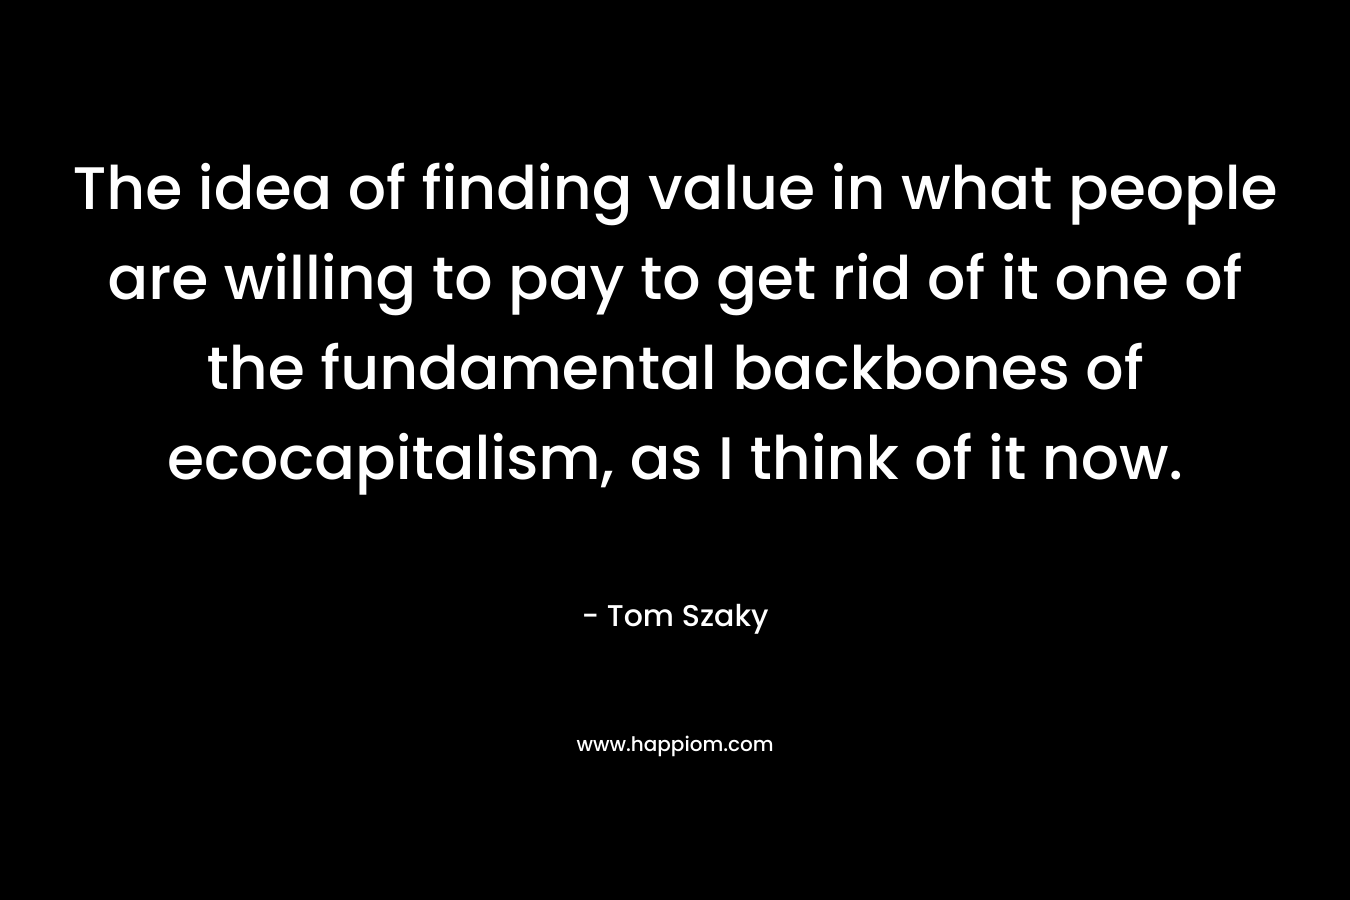 The idea of finding value in what people are willing to pay to get rid of it one of the fundamental backbones of ecocapitalism, as I think of it now. – Tom Szaky